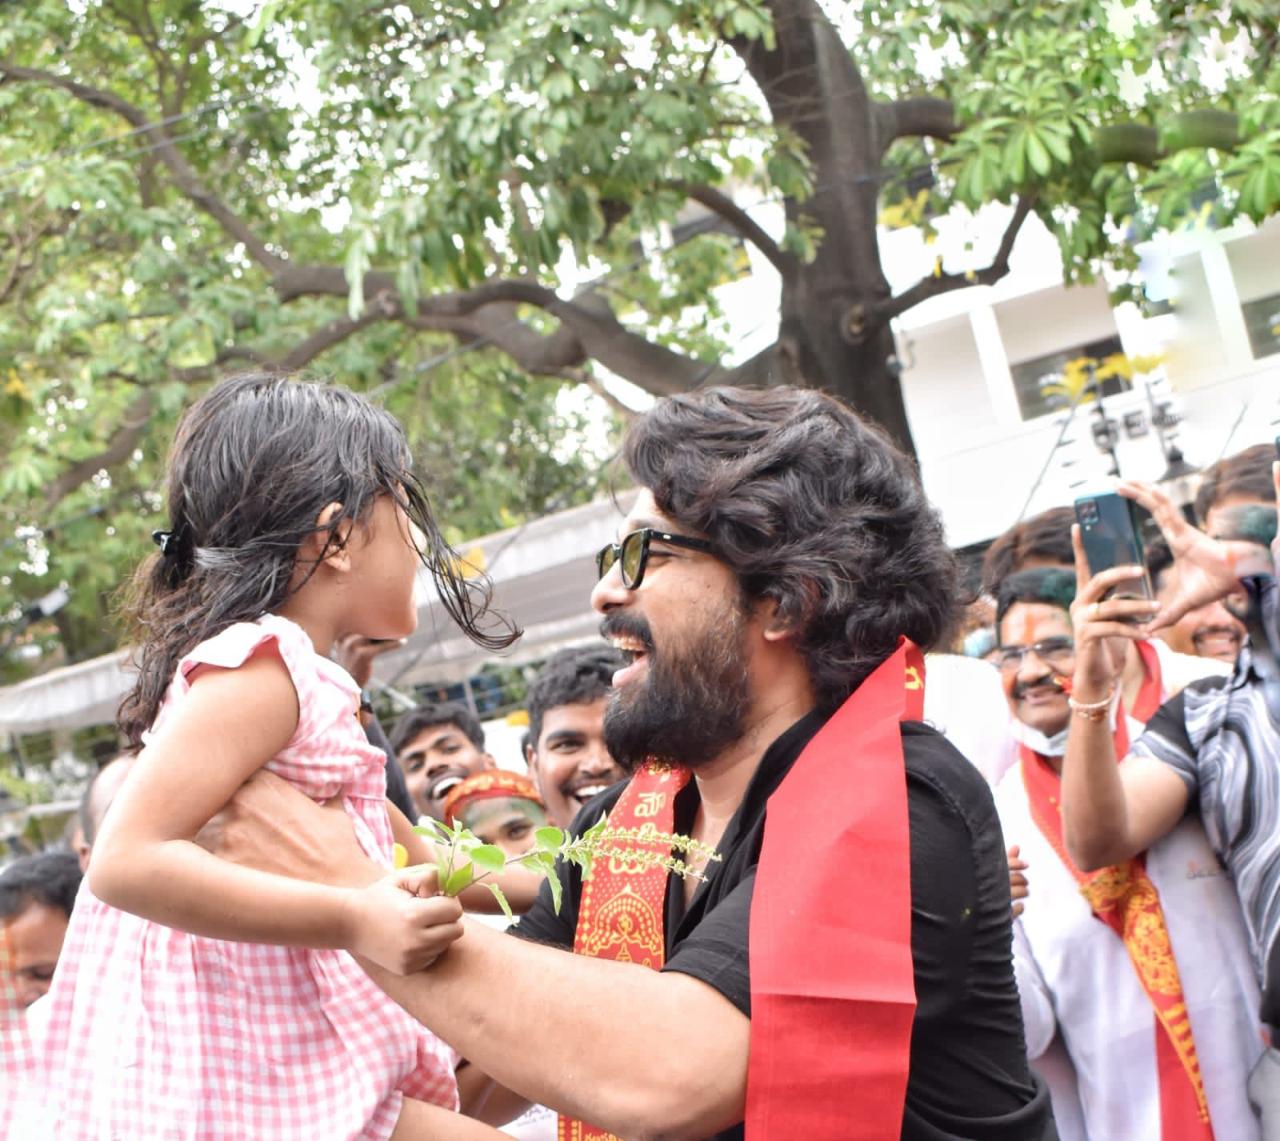 An actor with no airs and rooted to his culture, Allu Arjun did not hesitate to get on to the road to celebrate. He broke a coconut as he bid adieu to the Lord with his daughter